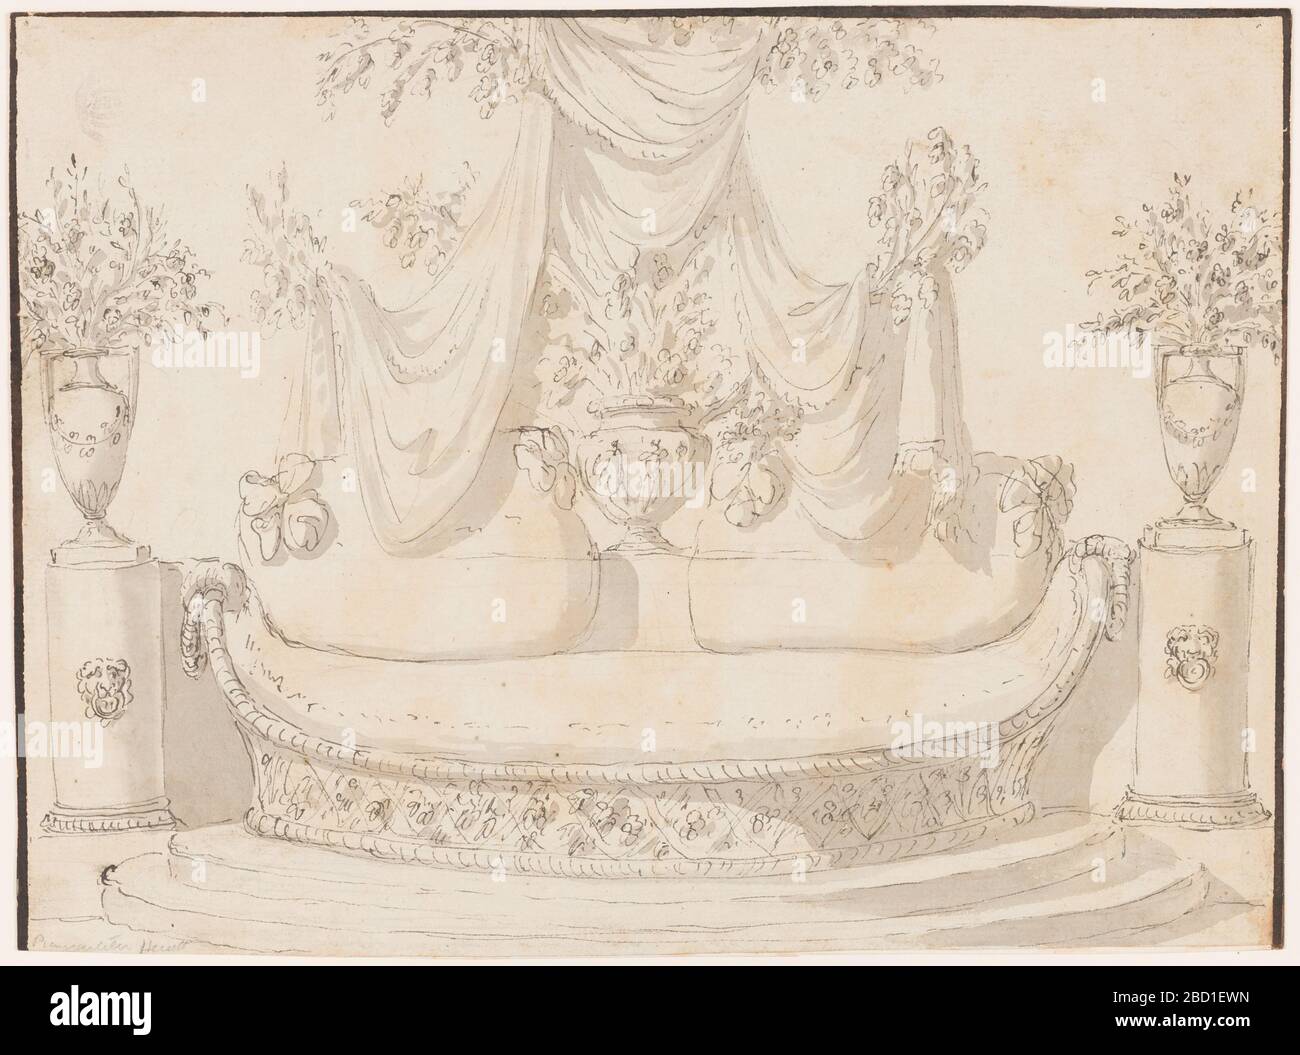 Sofa. Research in ProgressElevation of a boat-shaped sofa with a woven base, standing on a stepped platform. On either side is a column decorated with lion mask, supporting a vase with floral sprays. Two cushions on the sofa, each with a bow. Sofa Stock Photo